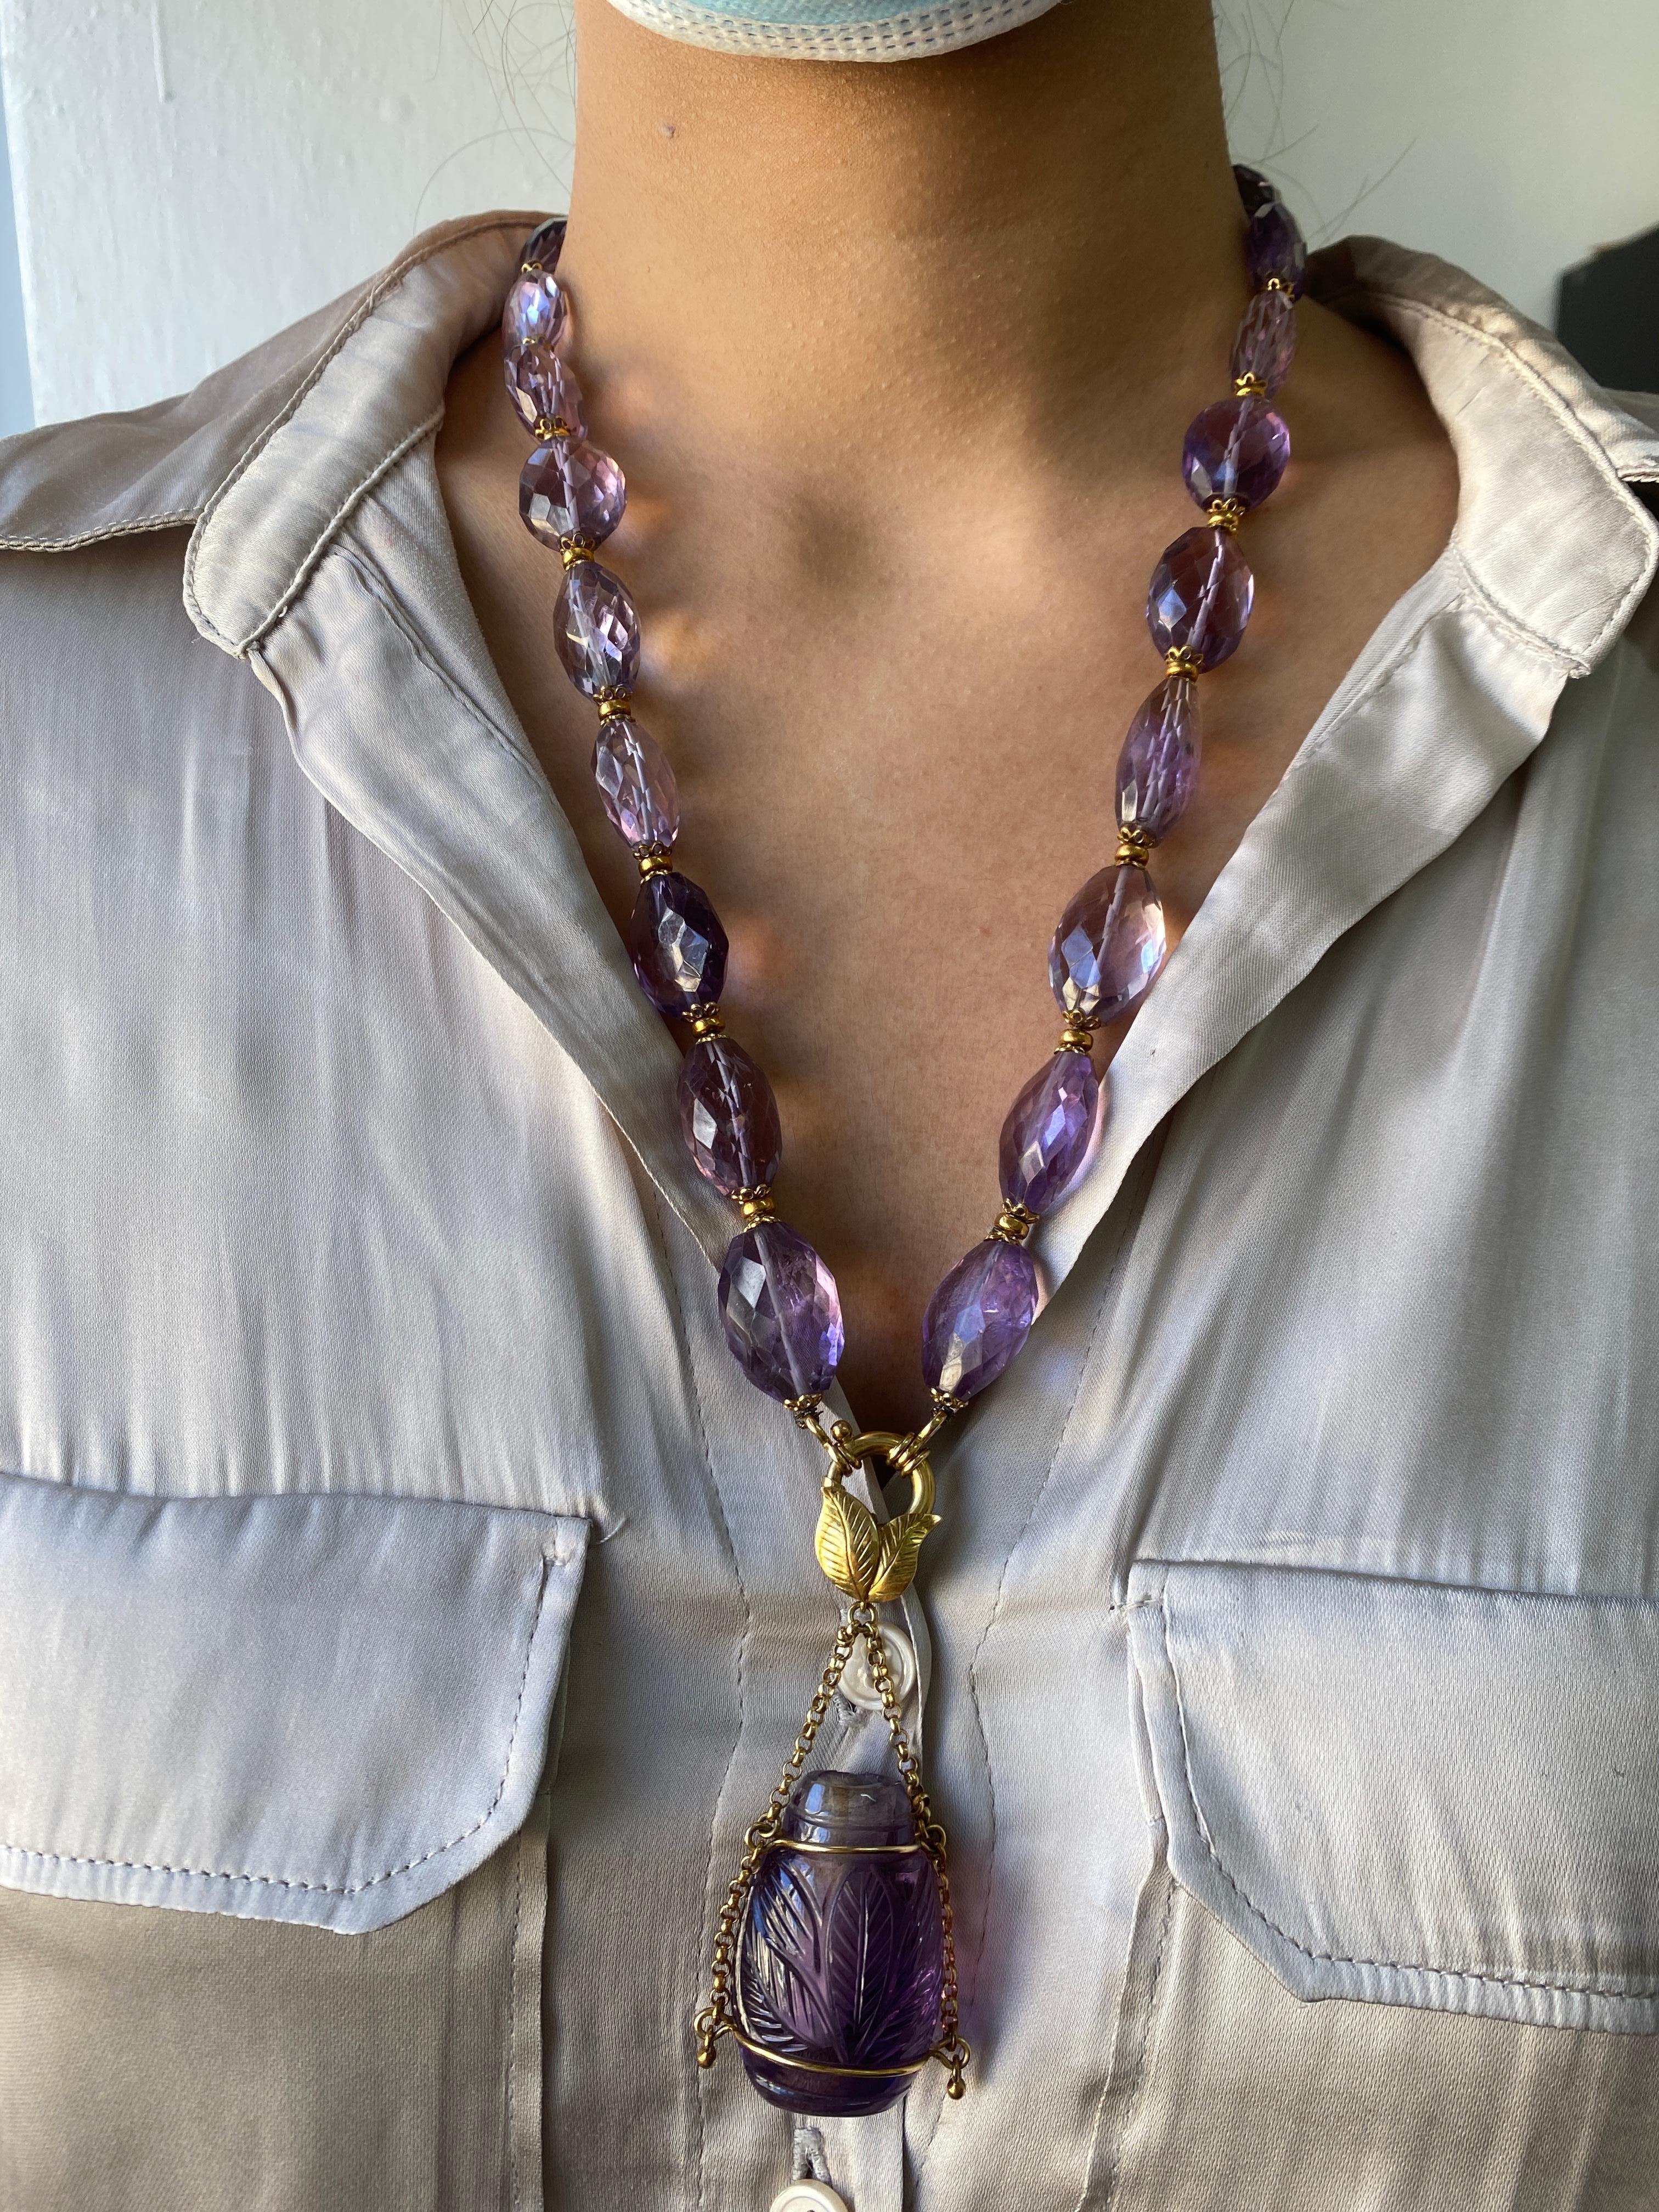 650 Carat Amethyst and Gold Beaded Necklace For Sale 1